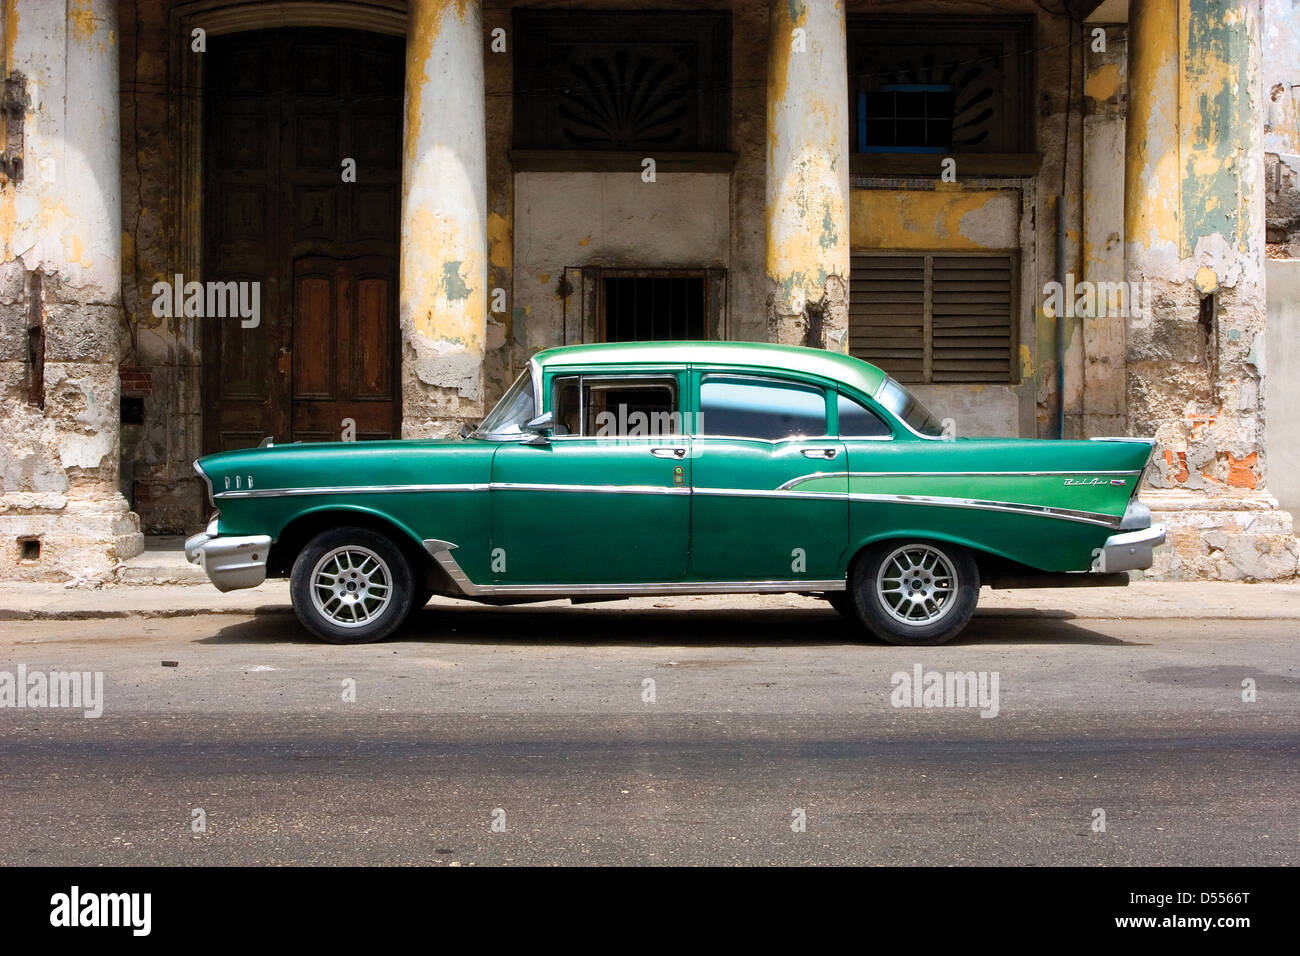 Chevrolet car on the decaying streets of Havana Stock Photo